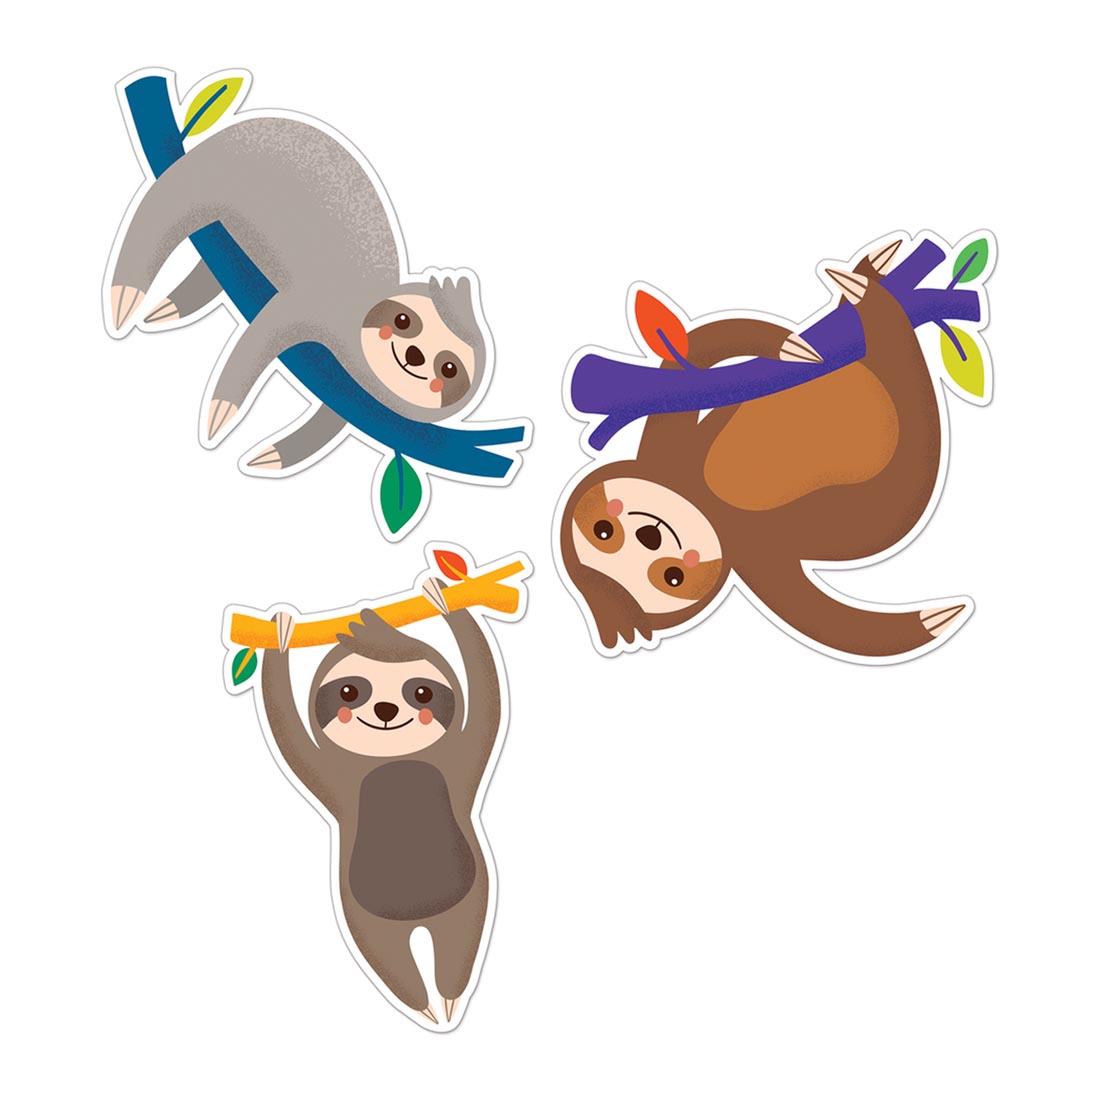 Sloths Assorted Colorful Cut-Outs from the One World collection by Carson Dellosa